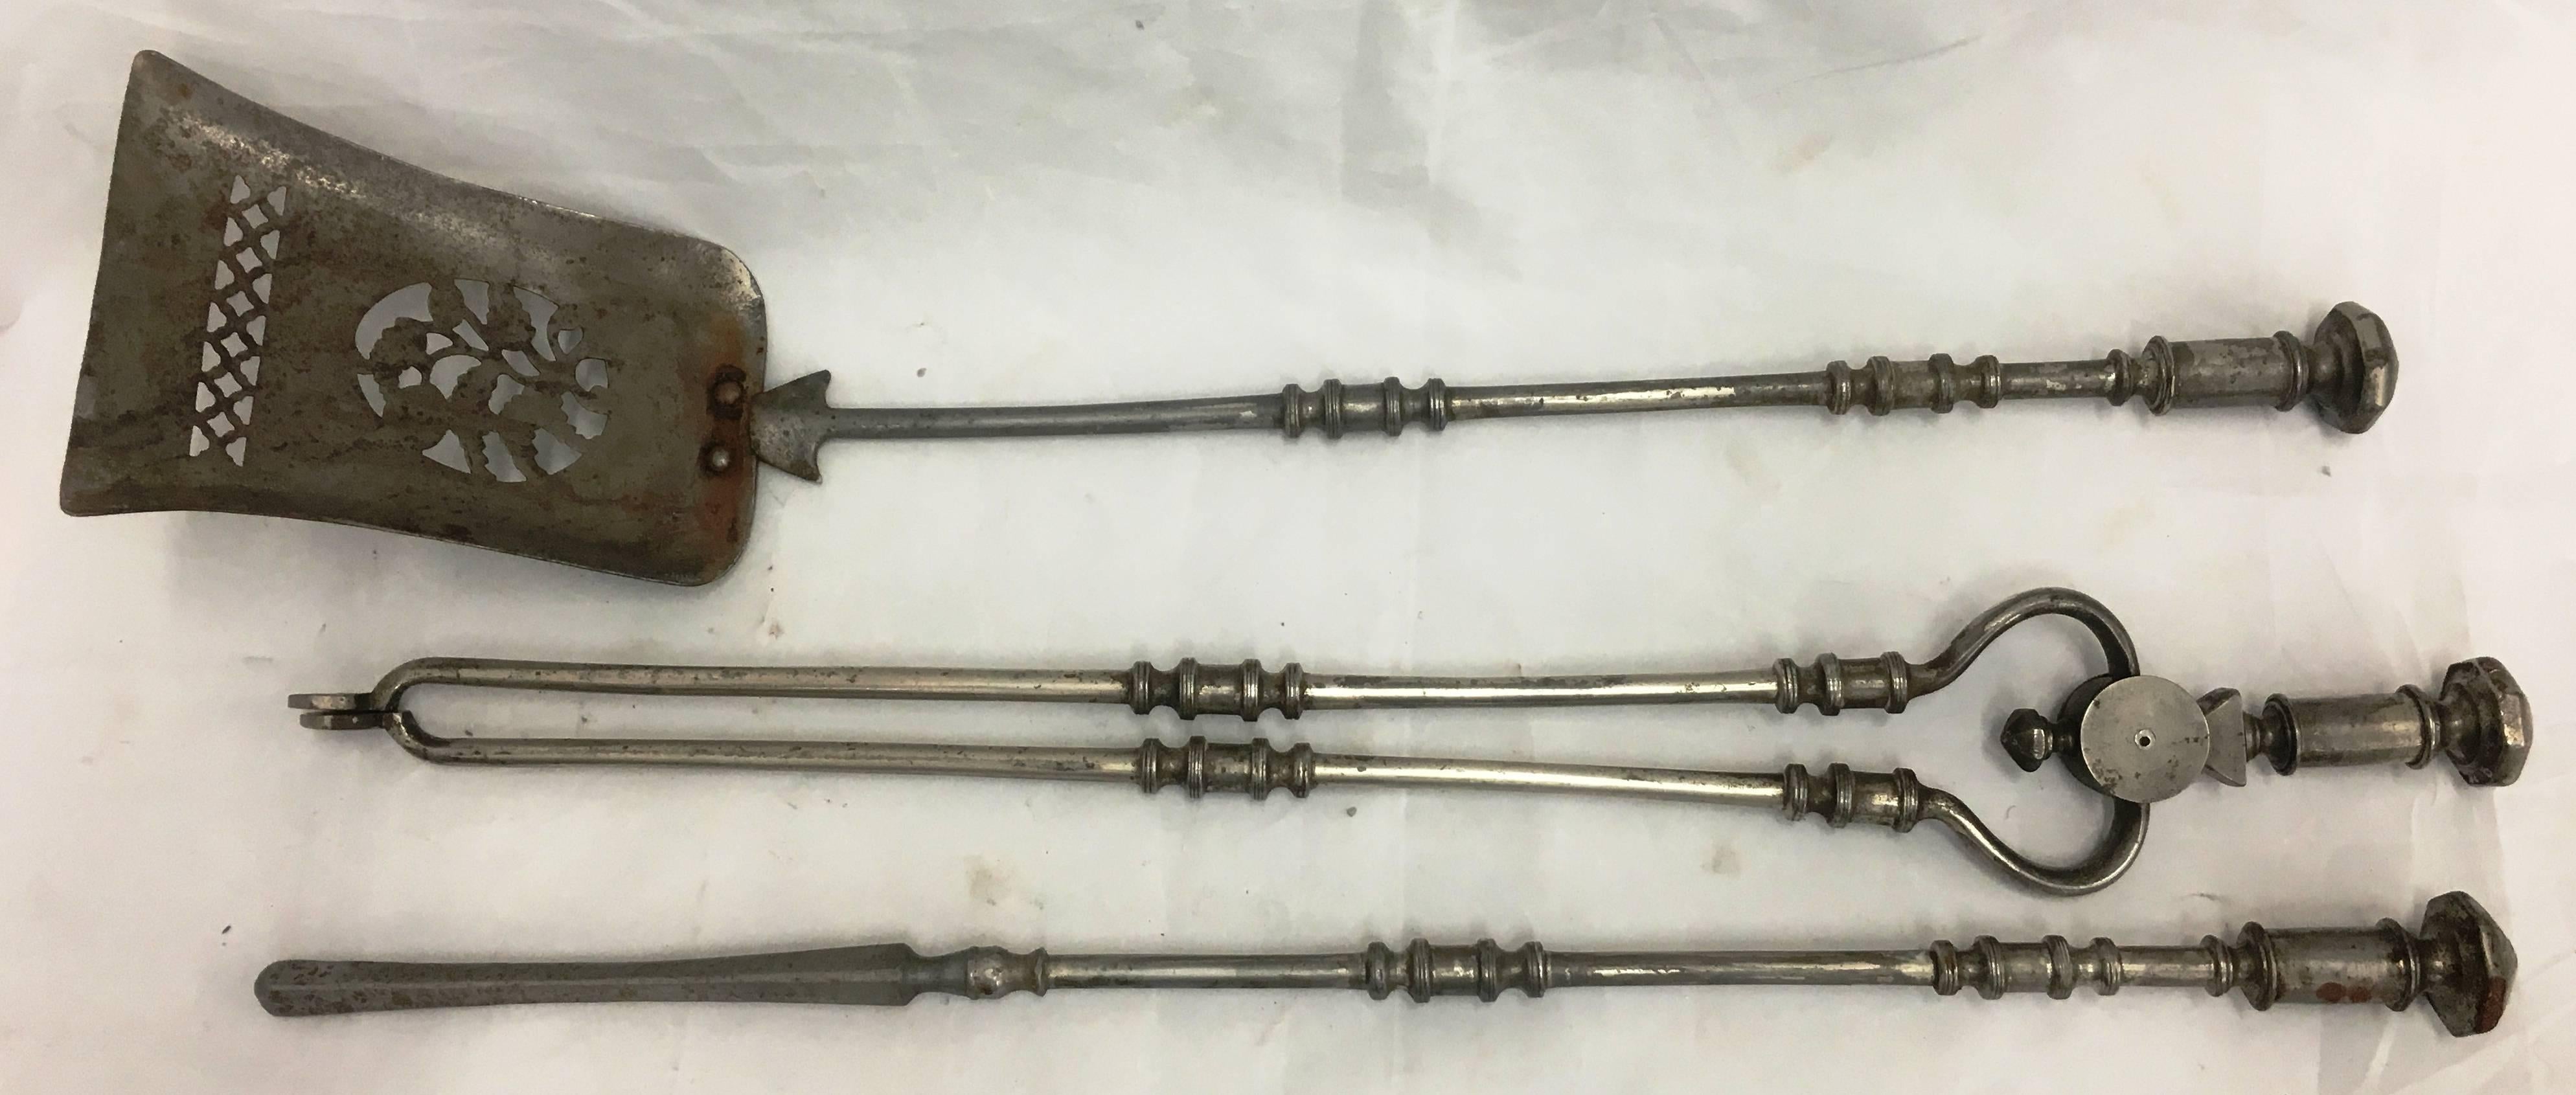 A good quality pair of Georgian steel fire irons, comprising of a pair of fire dogs, shovel, poker and tongs. Each have ring turned detail and a faceted finials.